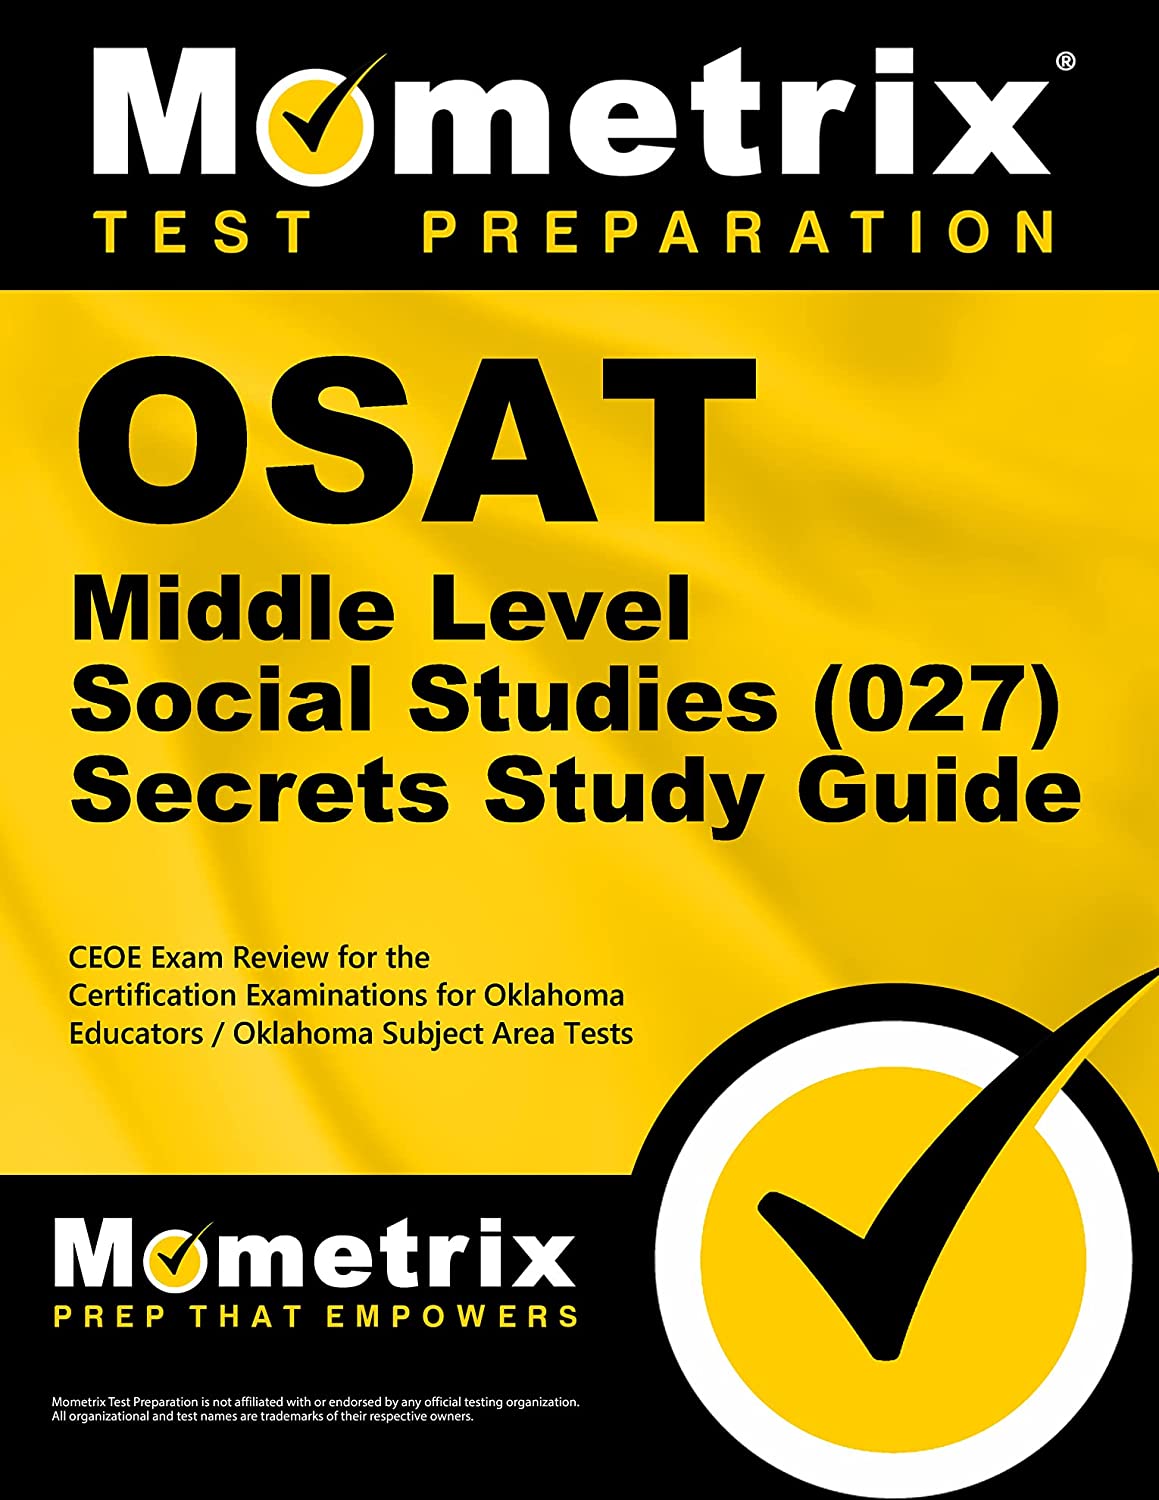 OSAT Middle Level Social Studies (027) Secrets Study Guide: CEOE Exam Review for the Certification Examinations for Oklahoma Educators / Oklahoma Subject Area Tests